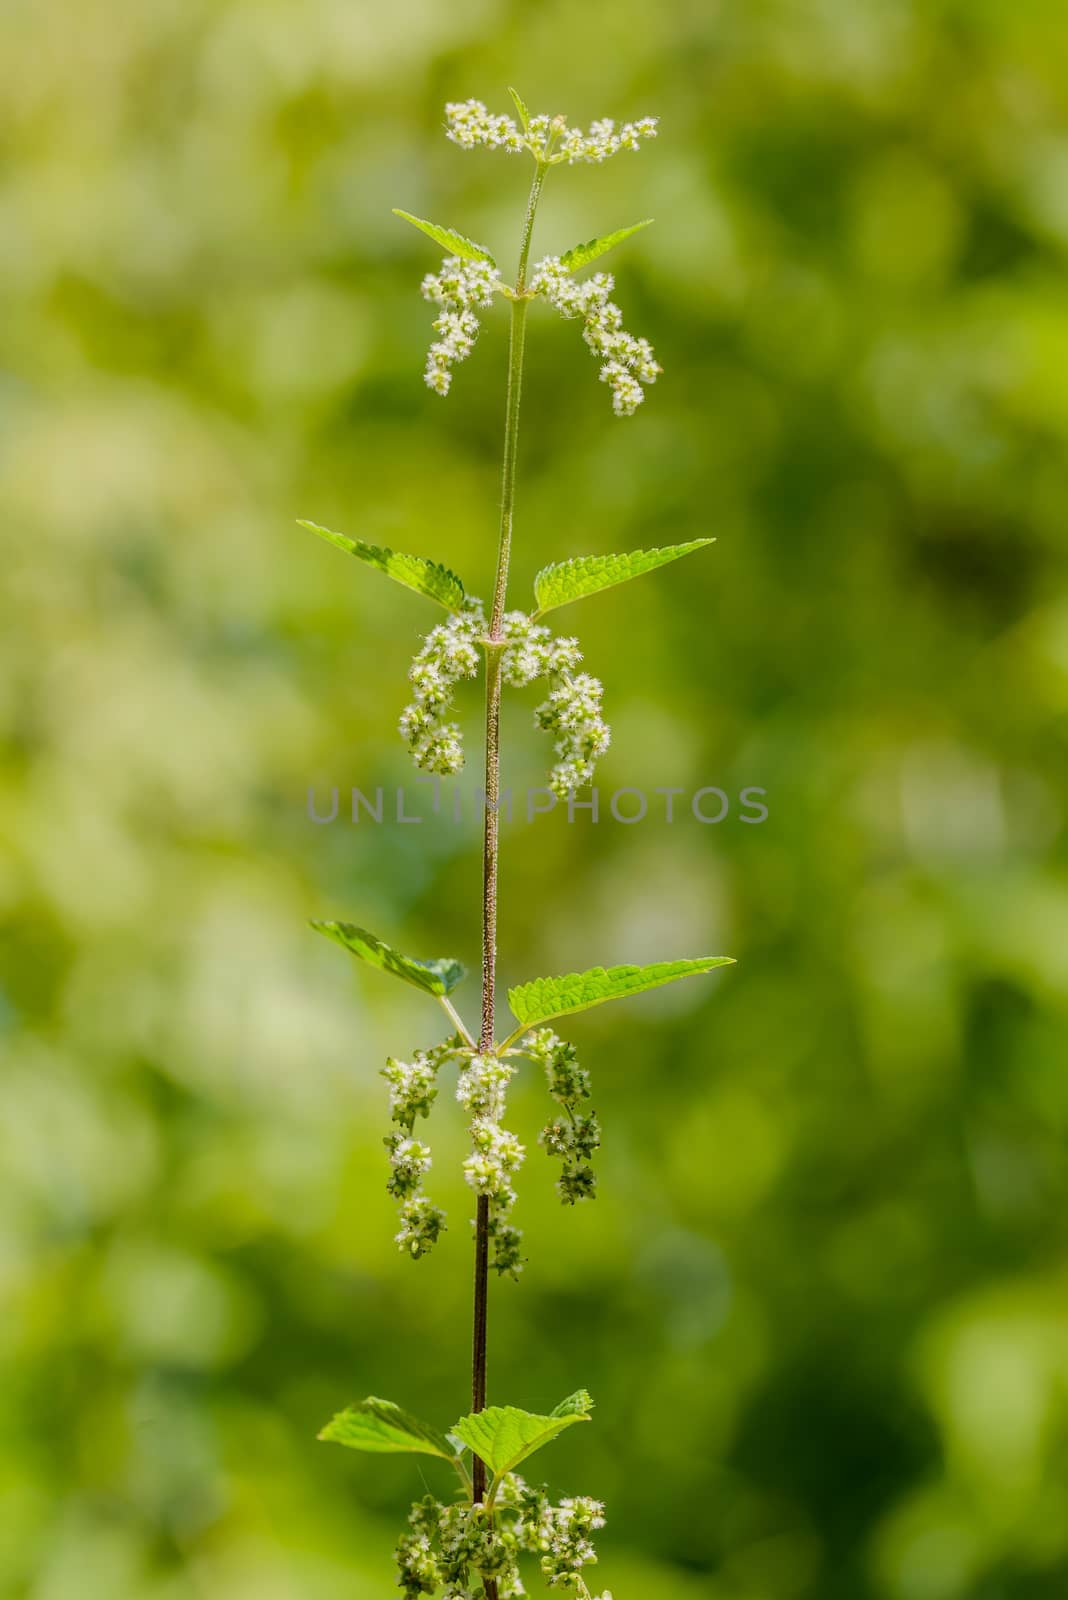 Nettle, Urtica dioica, also called common nettle or stinging nettle, with white flowers, on forest background